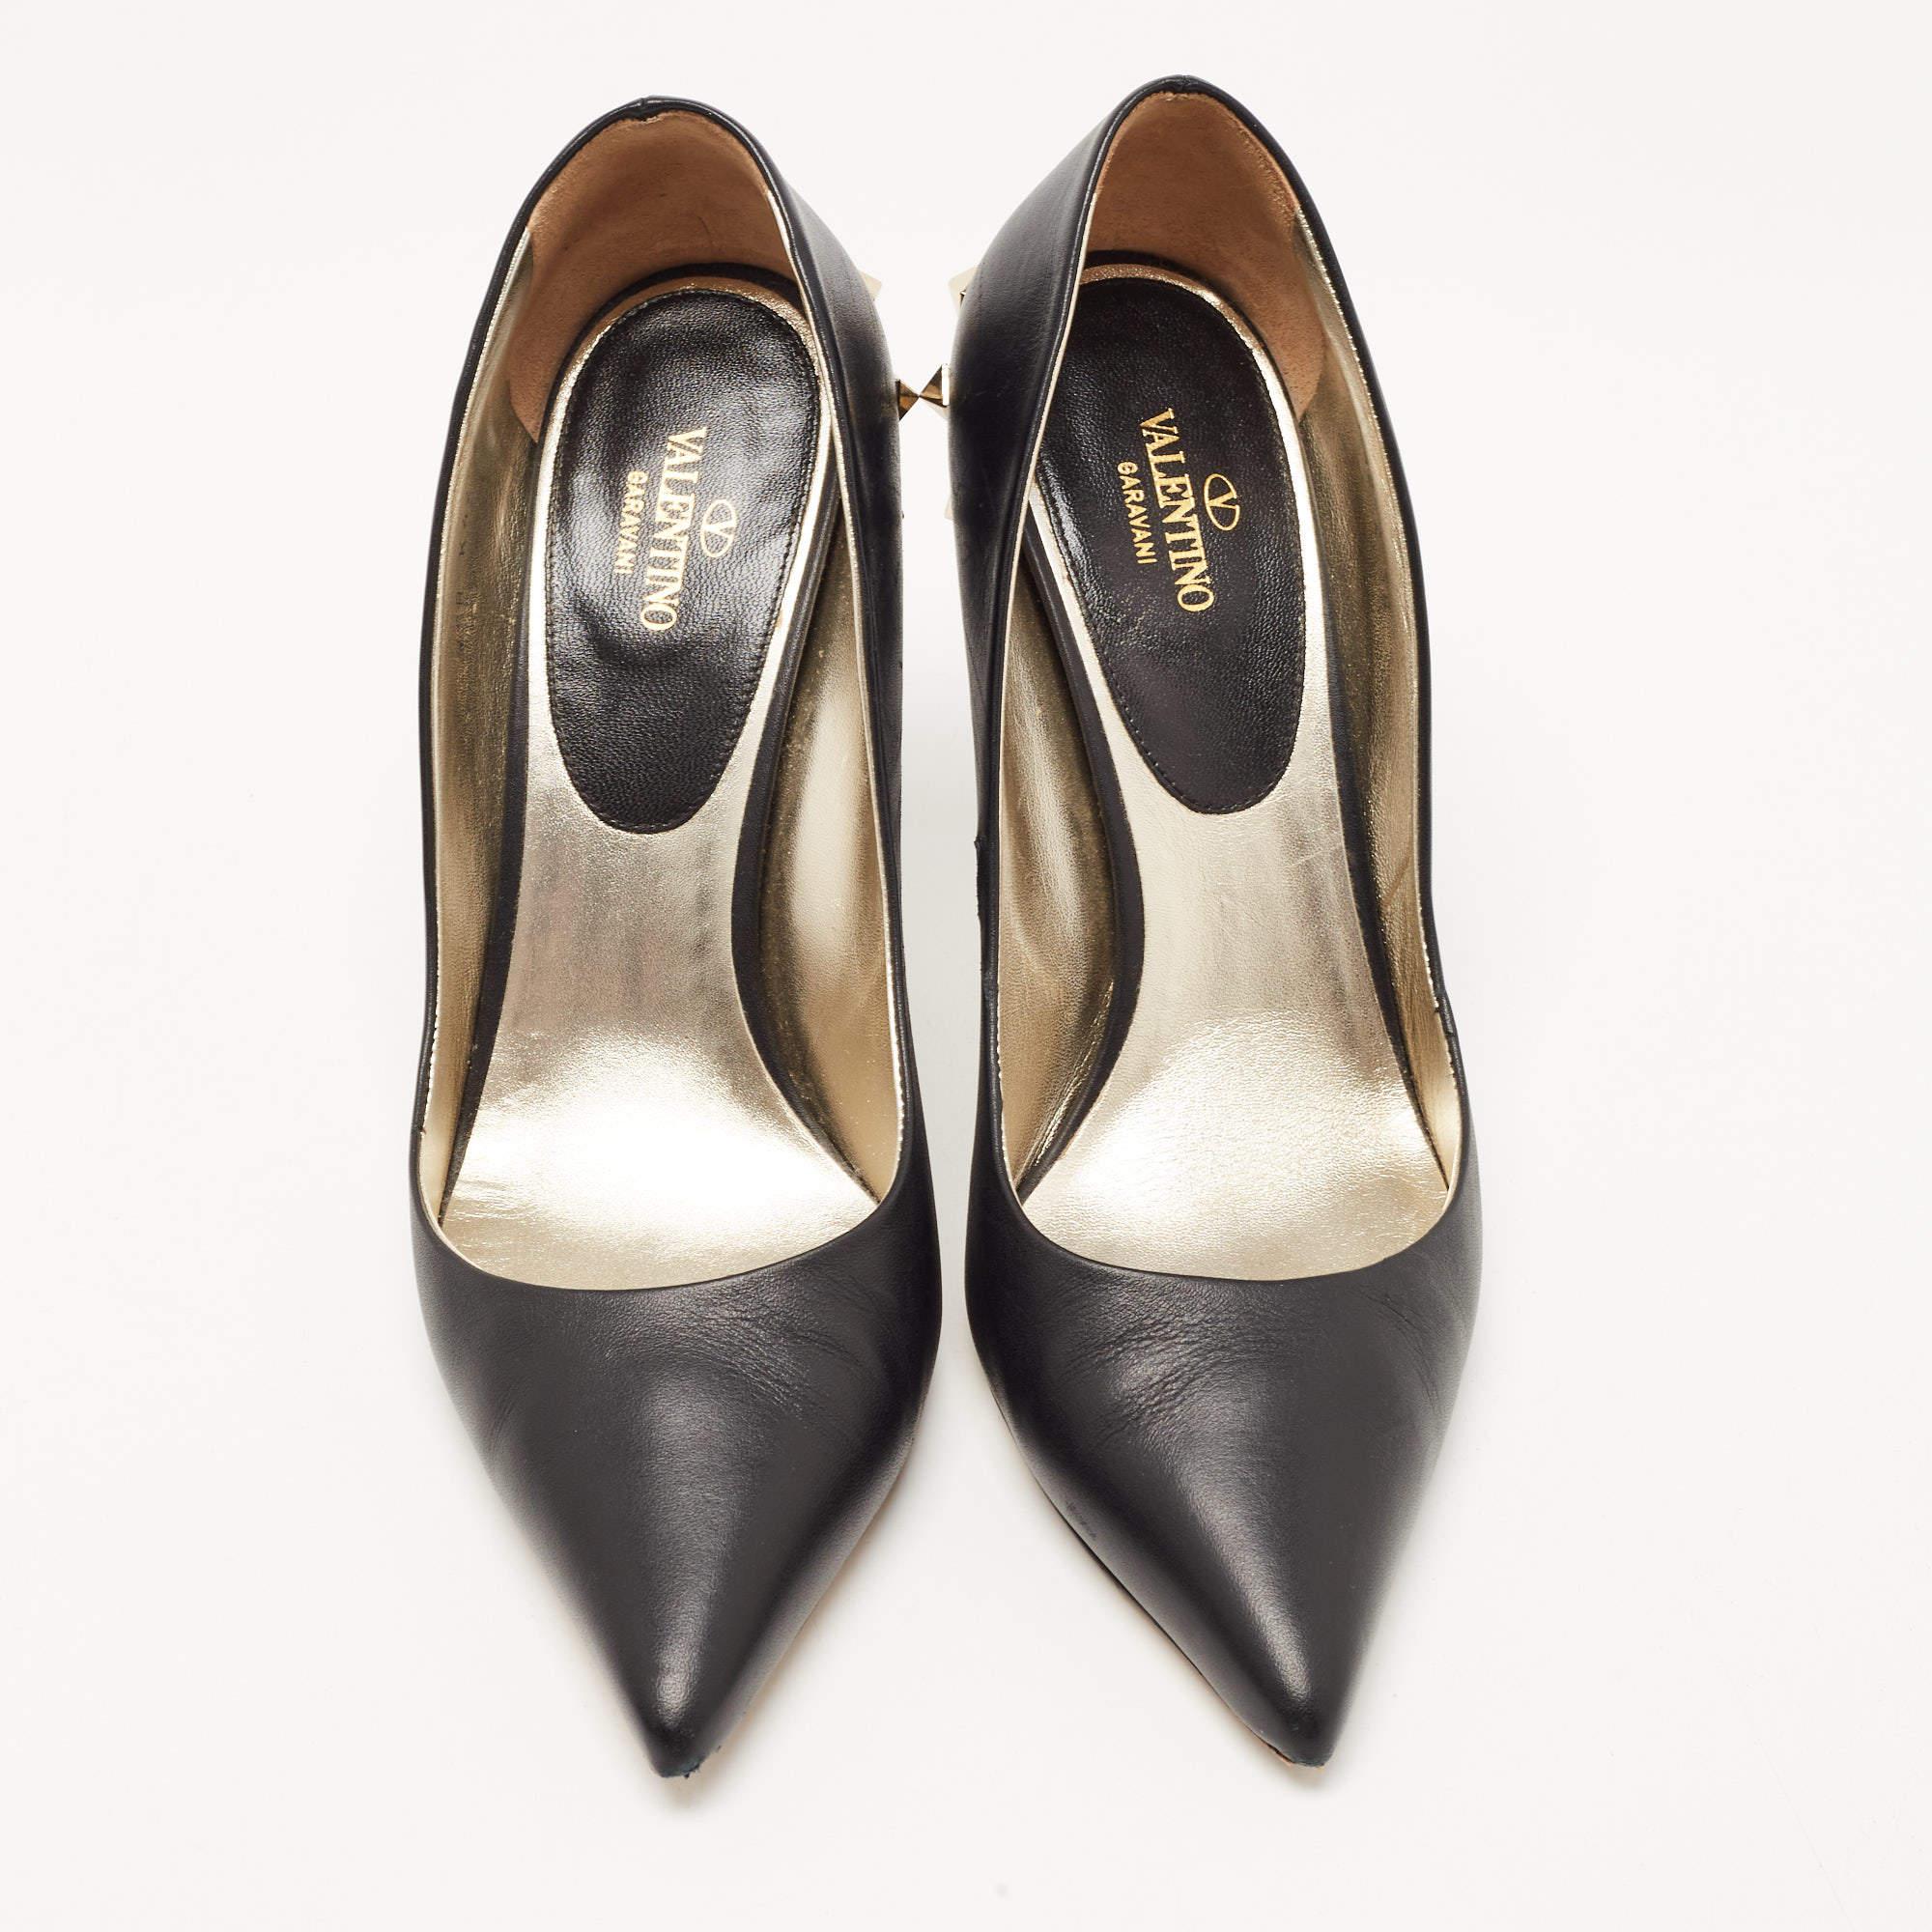 This pair of Valentino pumps is uniquely designed and makes for a distinct appearance. Created from quality materials, it is enriched with classic elements and signature Rockstuds.

